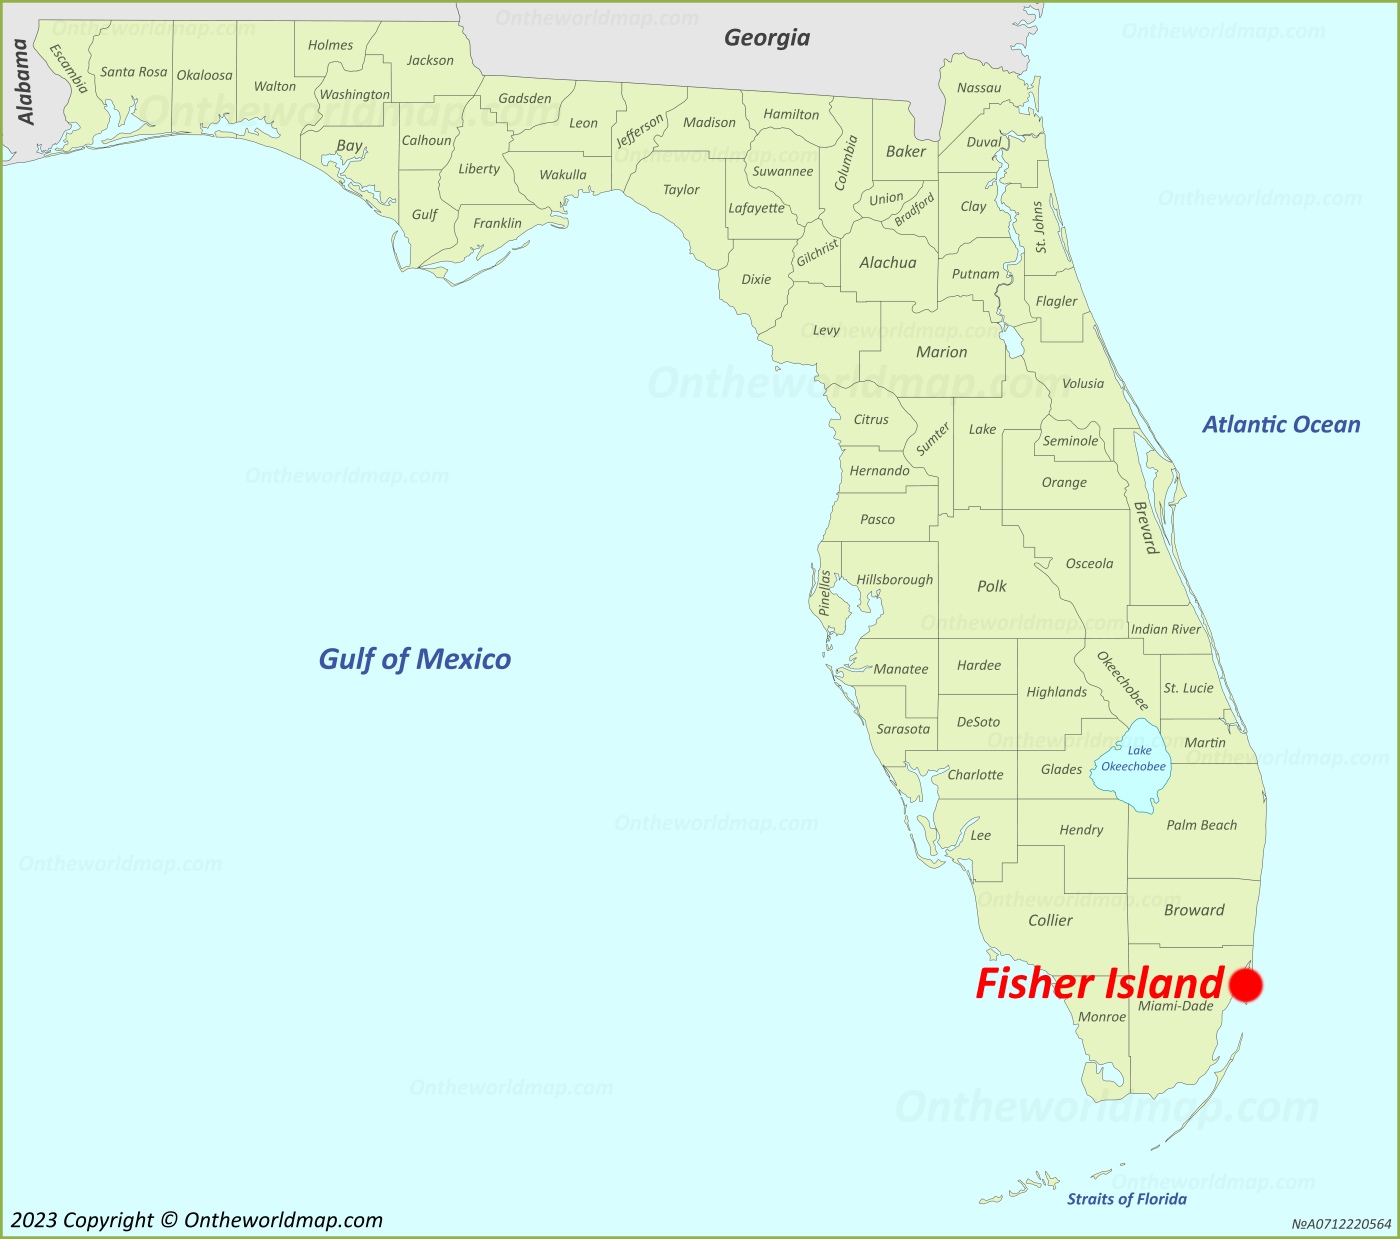 Fisher Island Location On The Florida Map